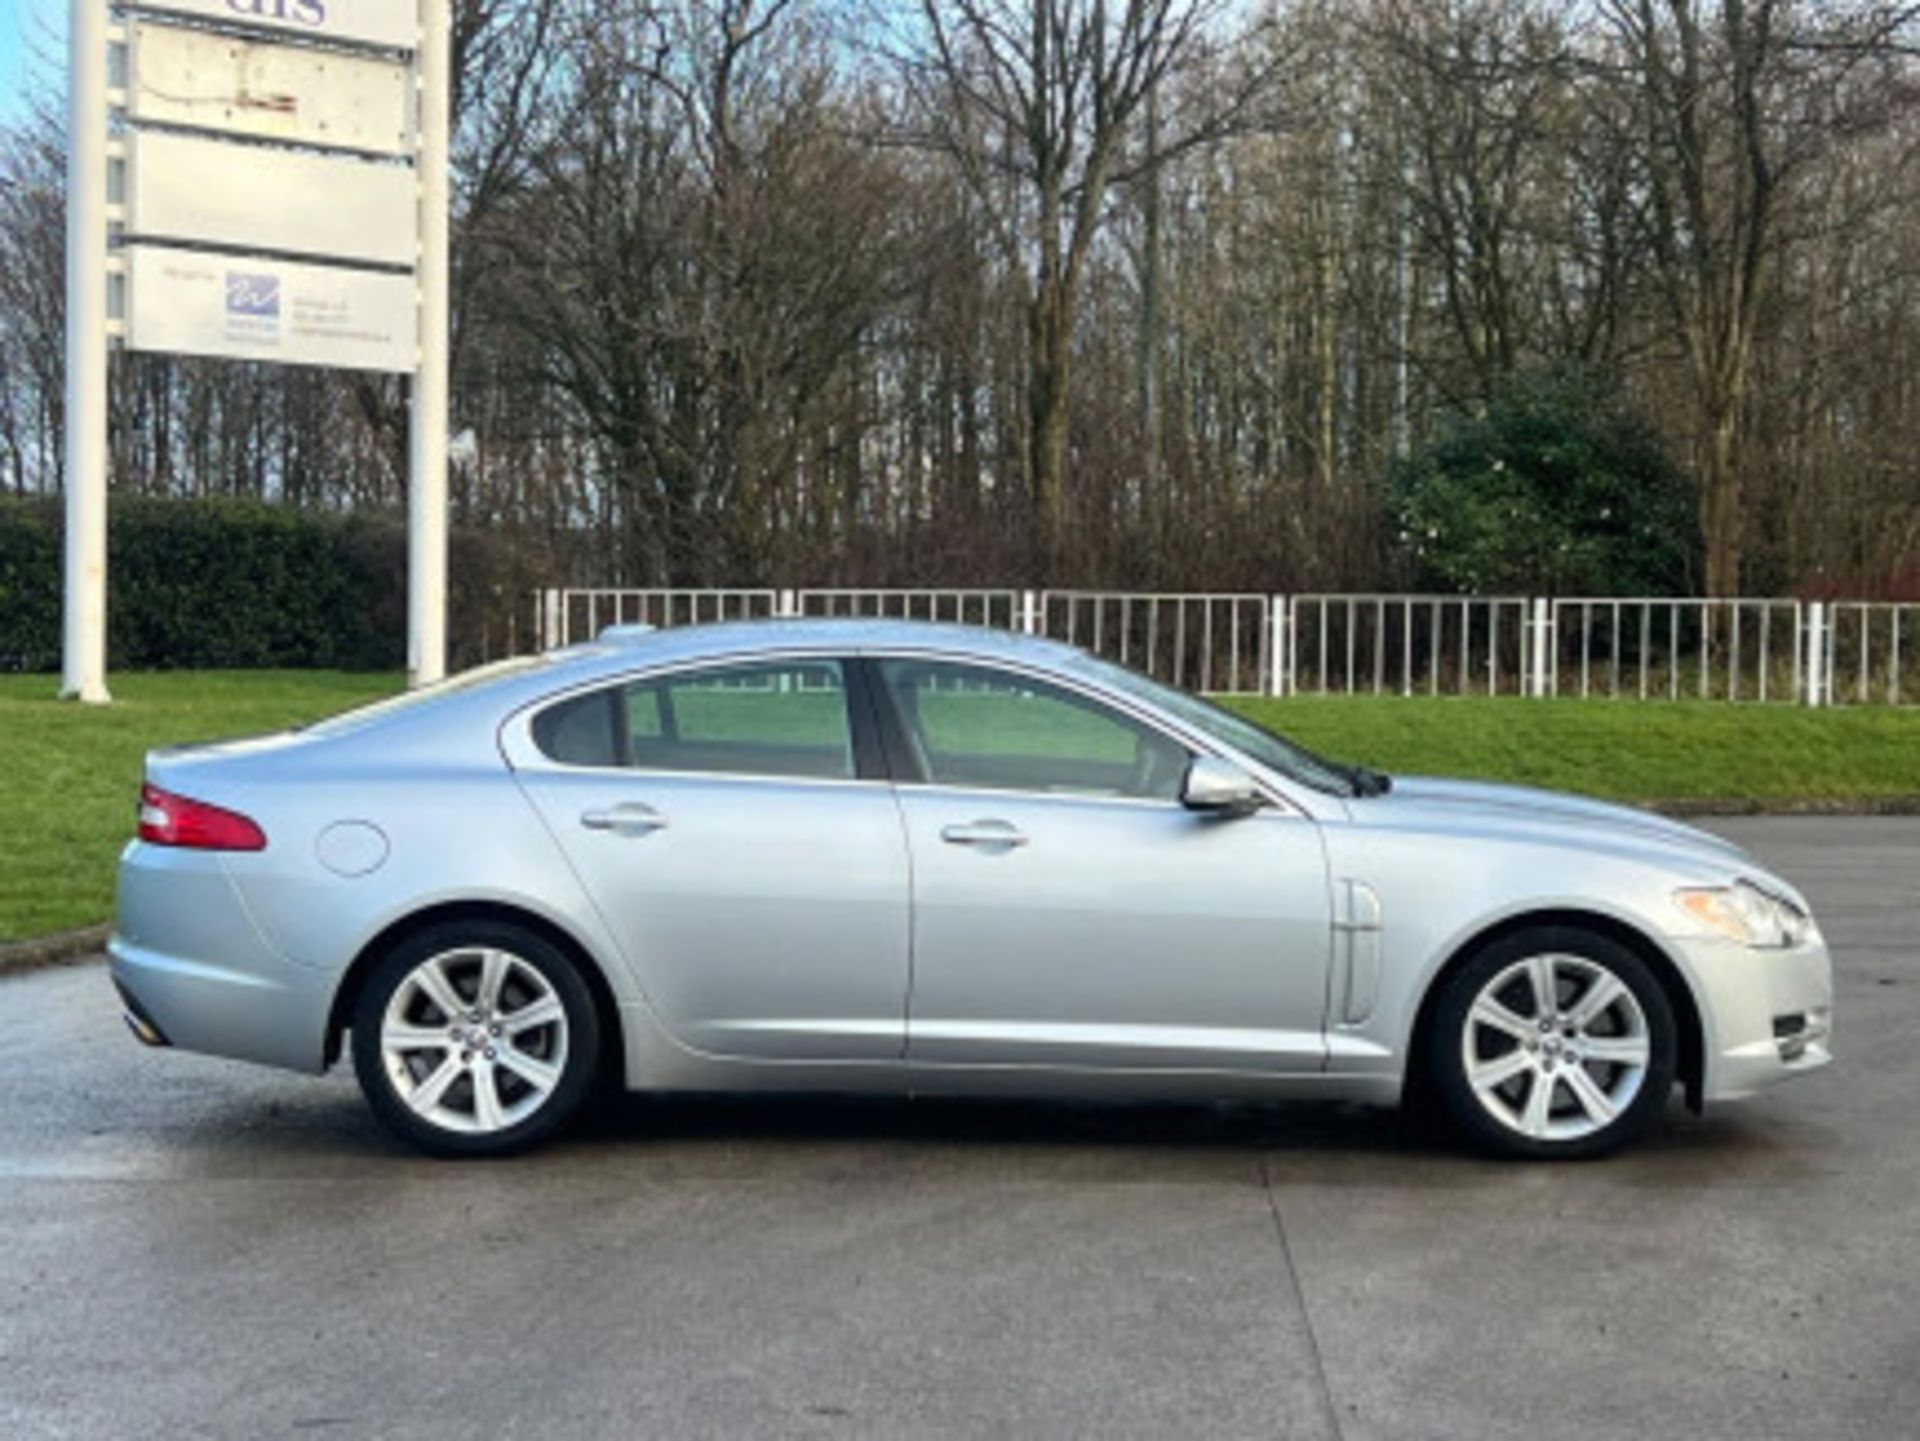 LUXURIOUS JAGUAR XF 3.0D V6 LUXURY 4DR AUTOMATIC SALOON >>--NO VAT ON HAMMER--<< - Image 39 of 80